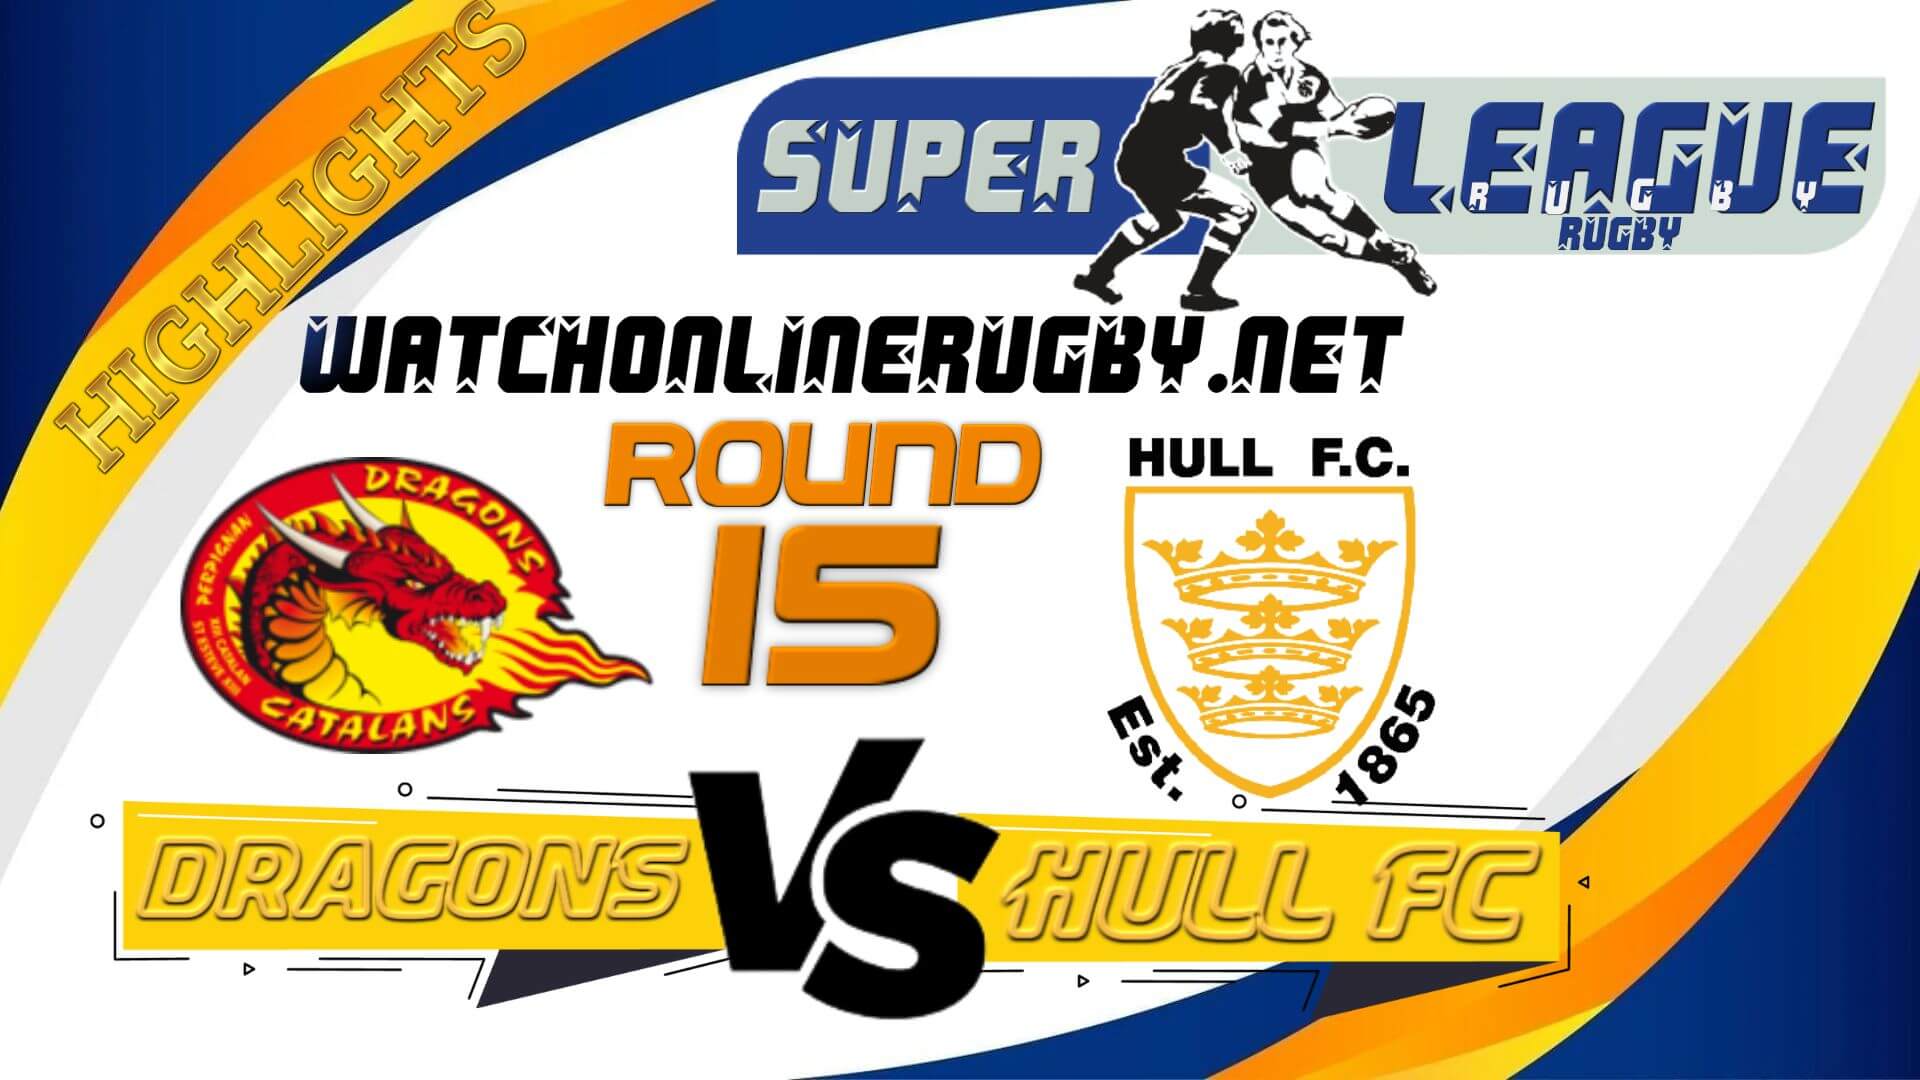 Catalans Dragons Vs Hull FC Super League Rugby 2022 RD 15